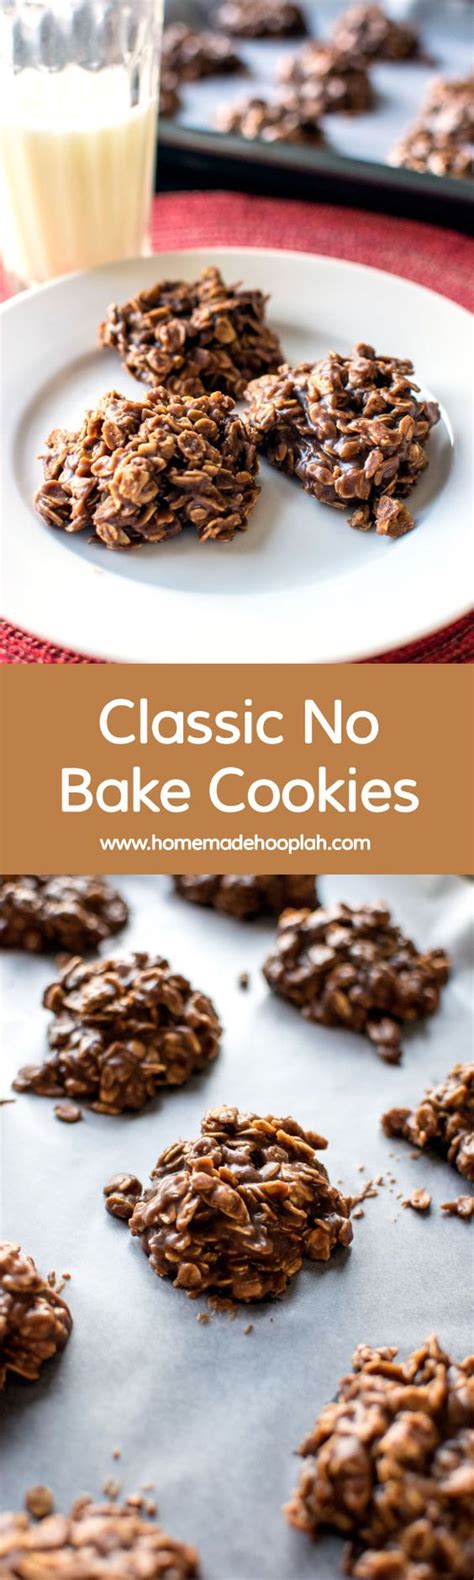 15, 2020 whether you're craving warm cookies, a creamy shake or some other nostalgic treat, turn to these quick, easy desserts from grandma's recipe box. Classic No Bake Cookies! A cookie classic - tried and true ...